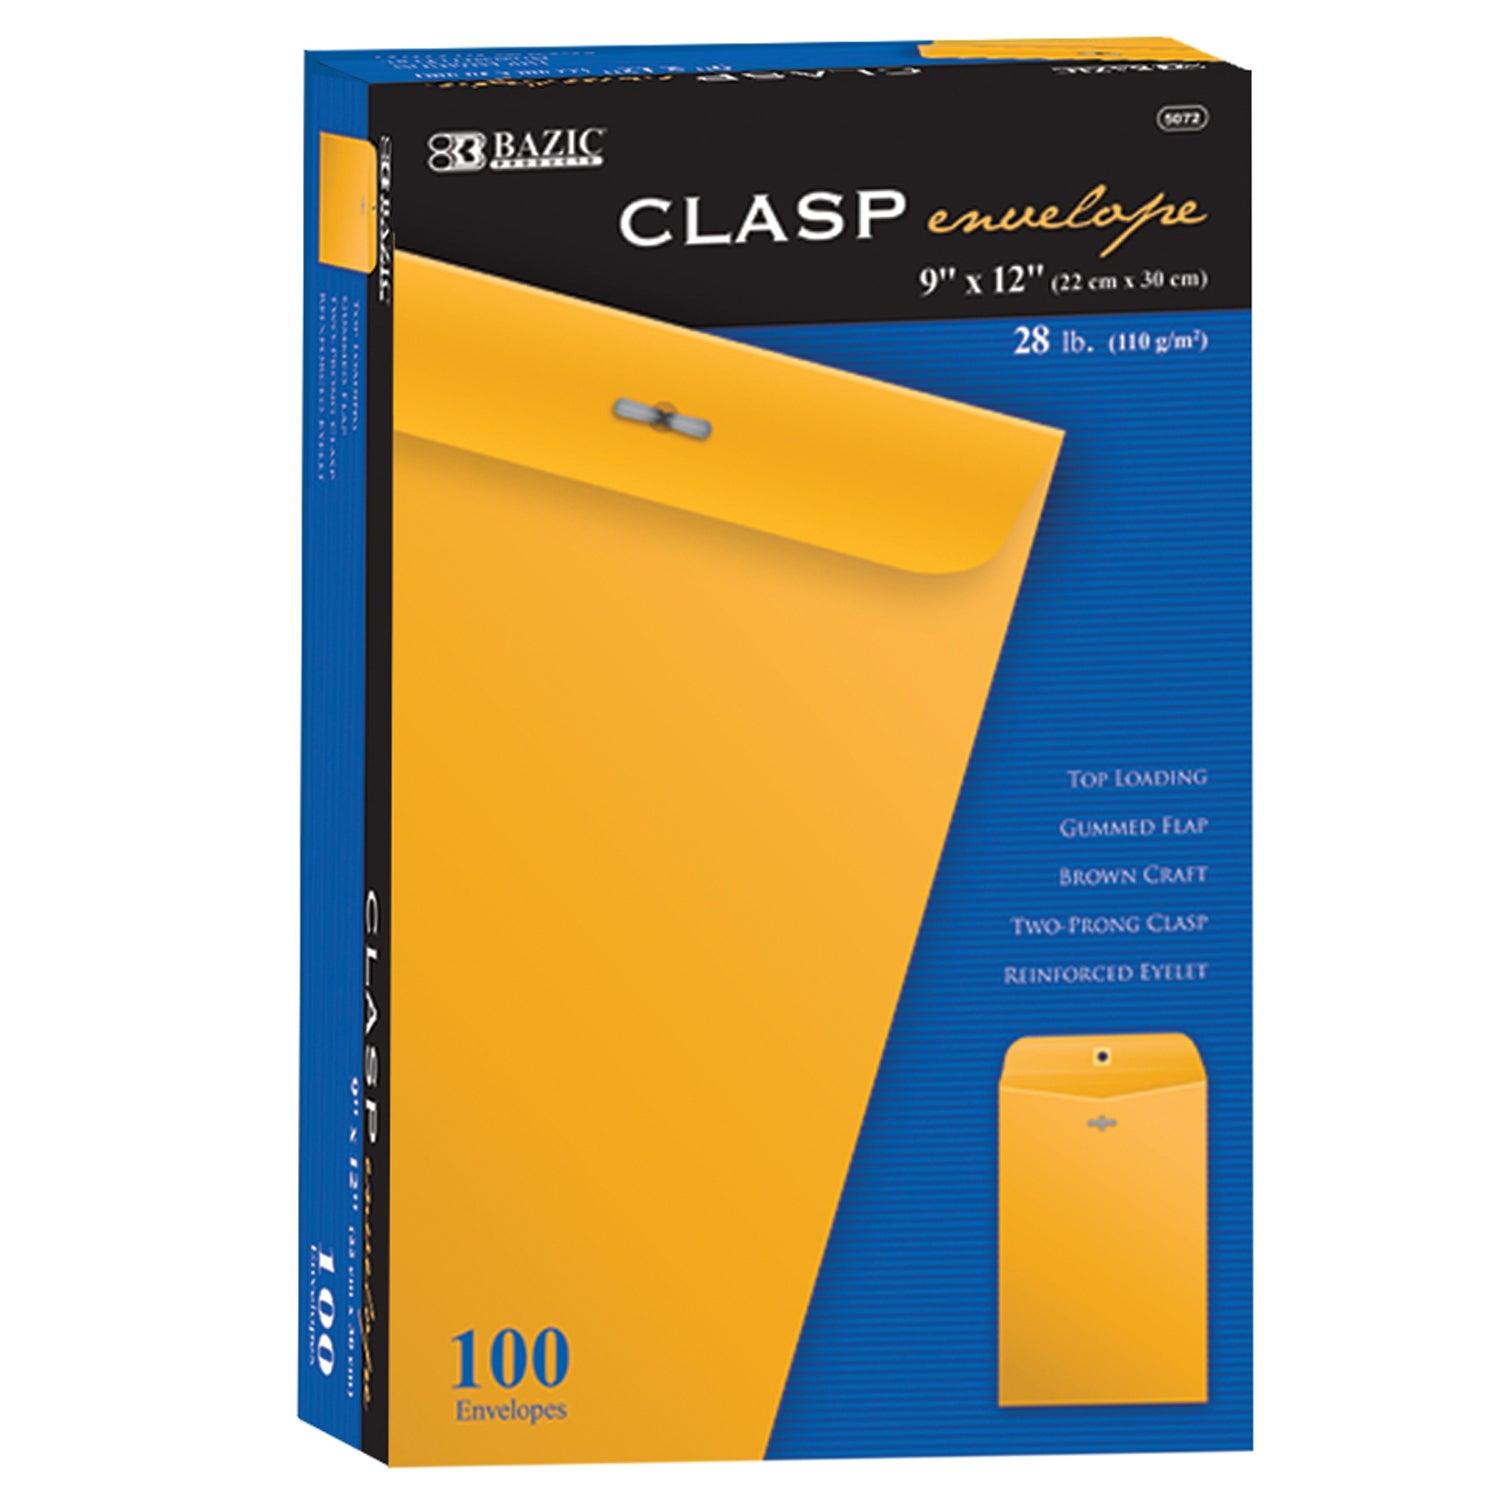 Clasp Envelopes, 9" x 12", Pack of 100 - Loomini